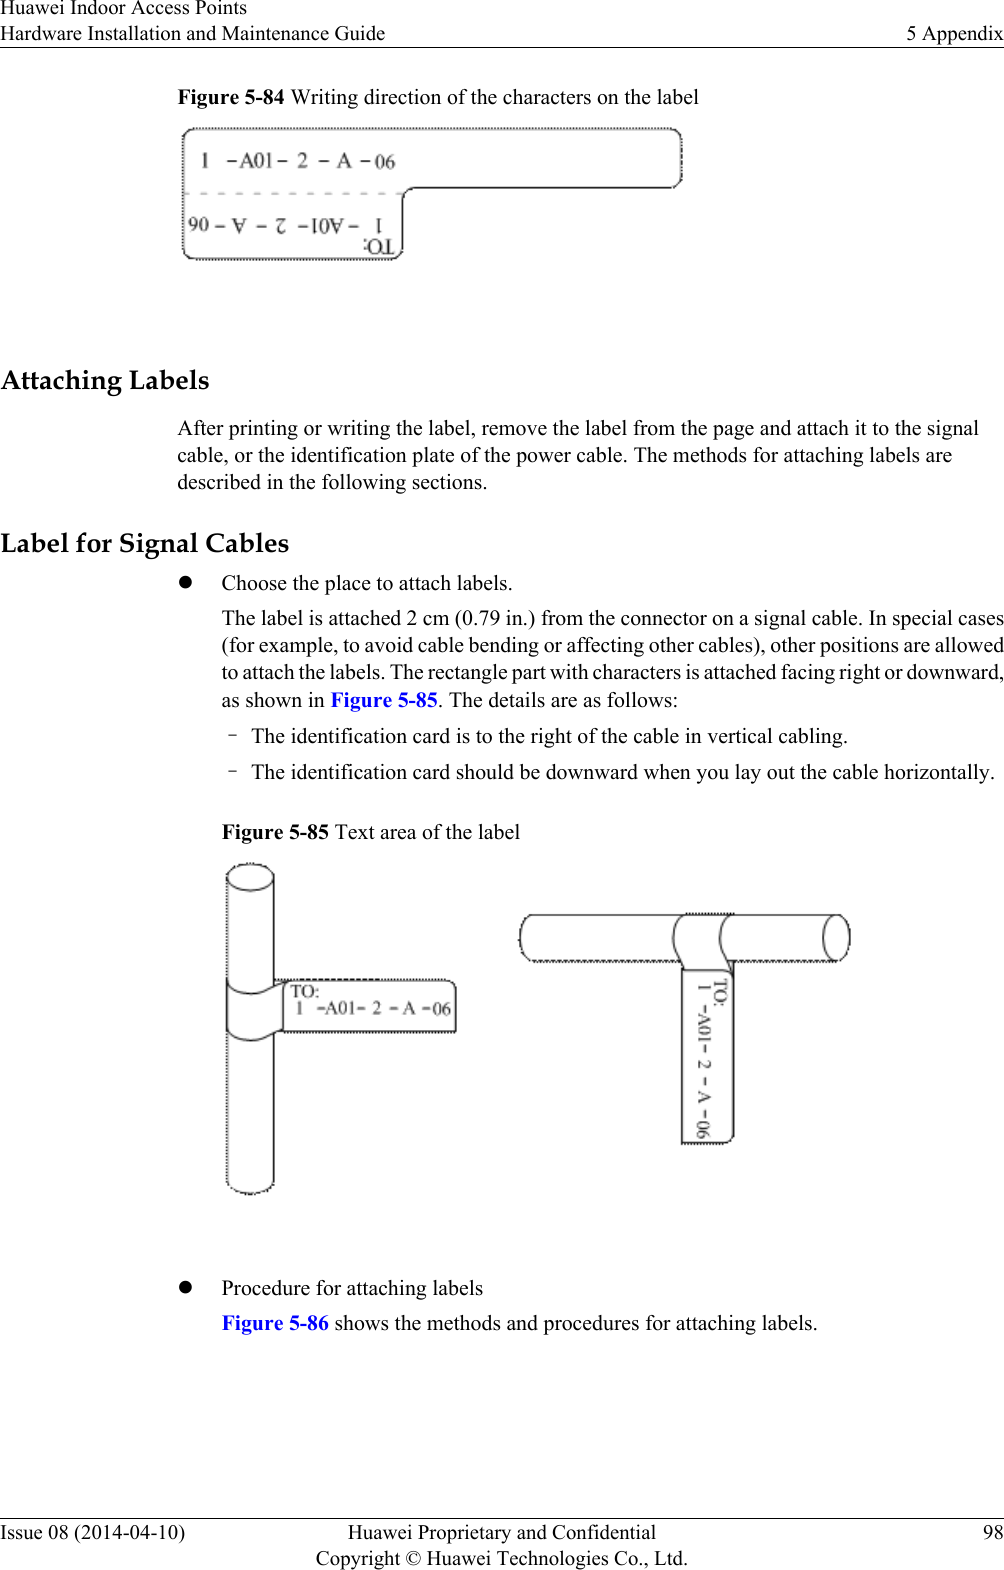 Figure 5-84 Writing direction of the characters on the label Attaching LabelsAfter printing or writing the label, remove the label from the page and attach it to the signalcable, or the identification plate of the power cable. The methods for attaching labels aredescribed in the following sections.Label for Signal CableslChoose the place to attach labels.The label is attached 2 cm (0.79 in.) from the connector on a signal cable. In special cases(for example, to avoid cable bending or affecting other cables), other positions are allowedto attach the labels. The rectangle part with characters is attached facing right or downward,as shown in Figure 5-85. The details are as follows:–The identification card is to the right of the cable in vertical cabling.–The identification card should be downward when you lay out the cable horizontally.Figure 5-85 Text area of the label lProcedure for attaching labelsFigure 5-86 shows the methods and procedures for attaching labels.Huawei Indoor Access PointsHardware Installation and Maintenance Guide 5 AppendixIssue 08 (2014-04-10) Huawei Proprietary and ConfidentialCopyright © Huawei Technologies Co., Ltd.98